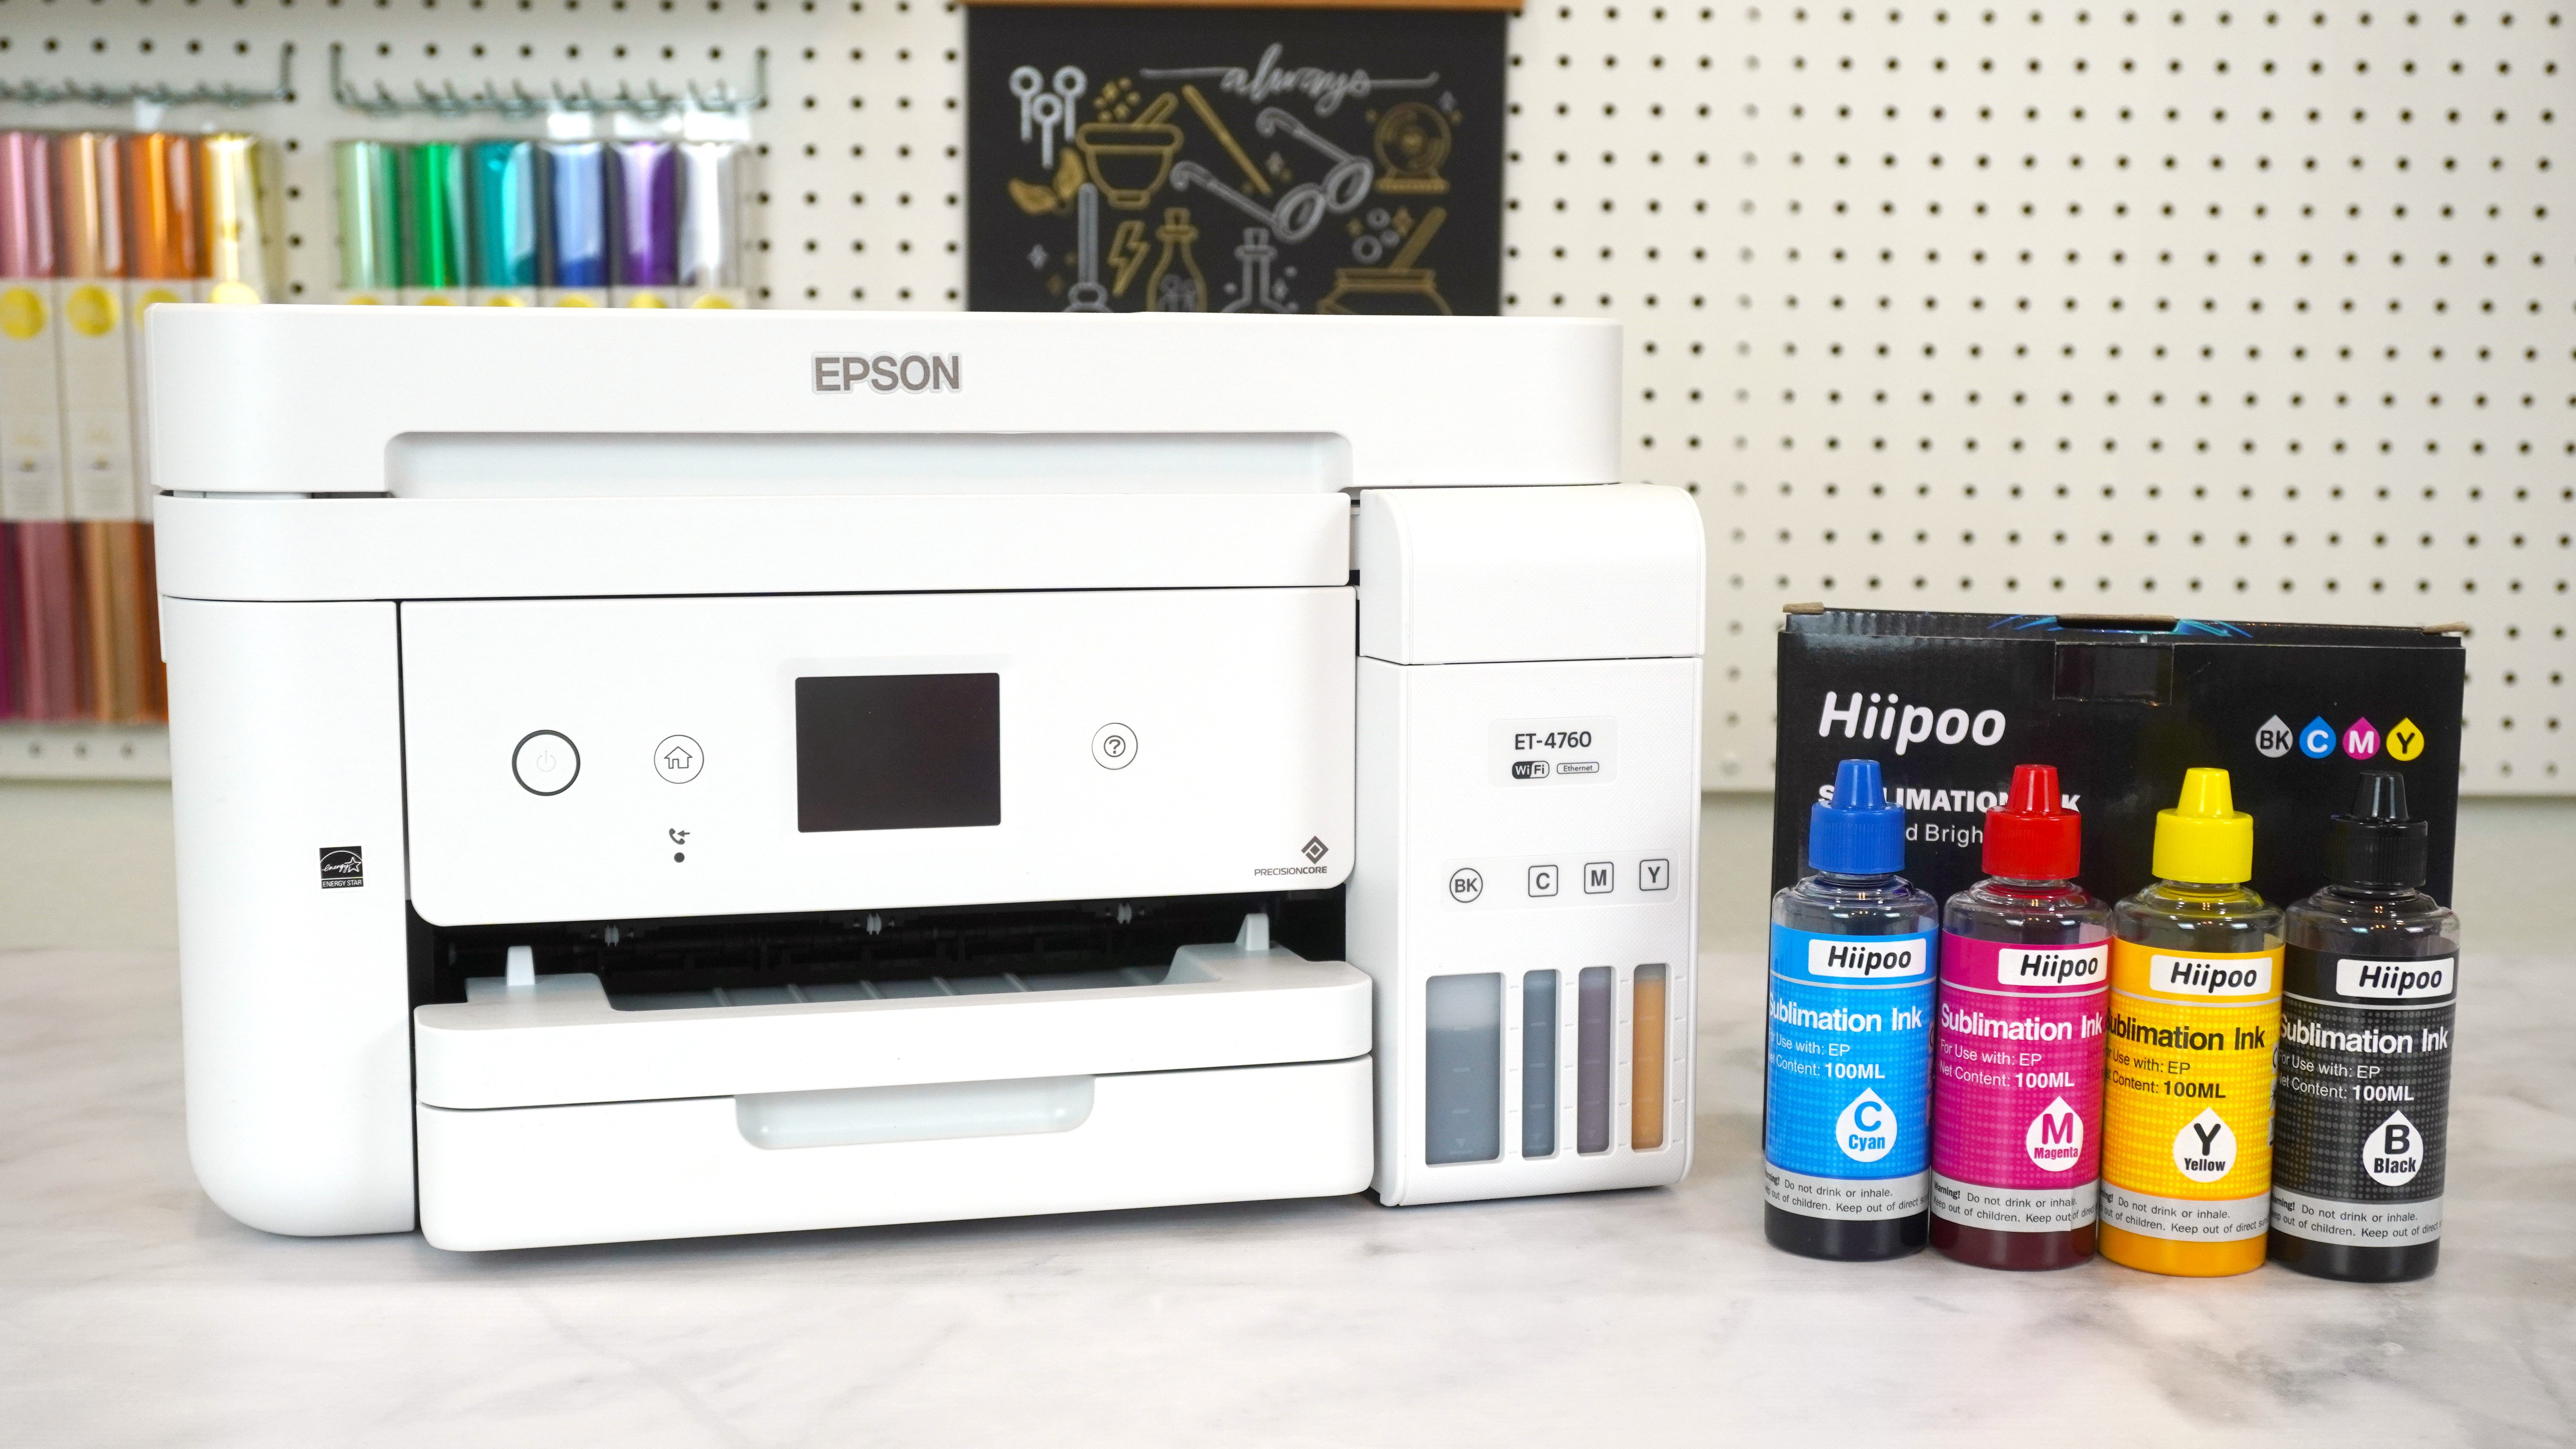 Epson EcoTank ET-4760 printer on table with bottles of cyan, magenta, yellow, and black Hiipoo sublimation ink
